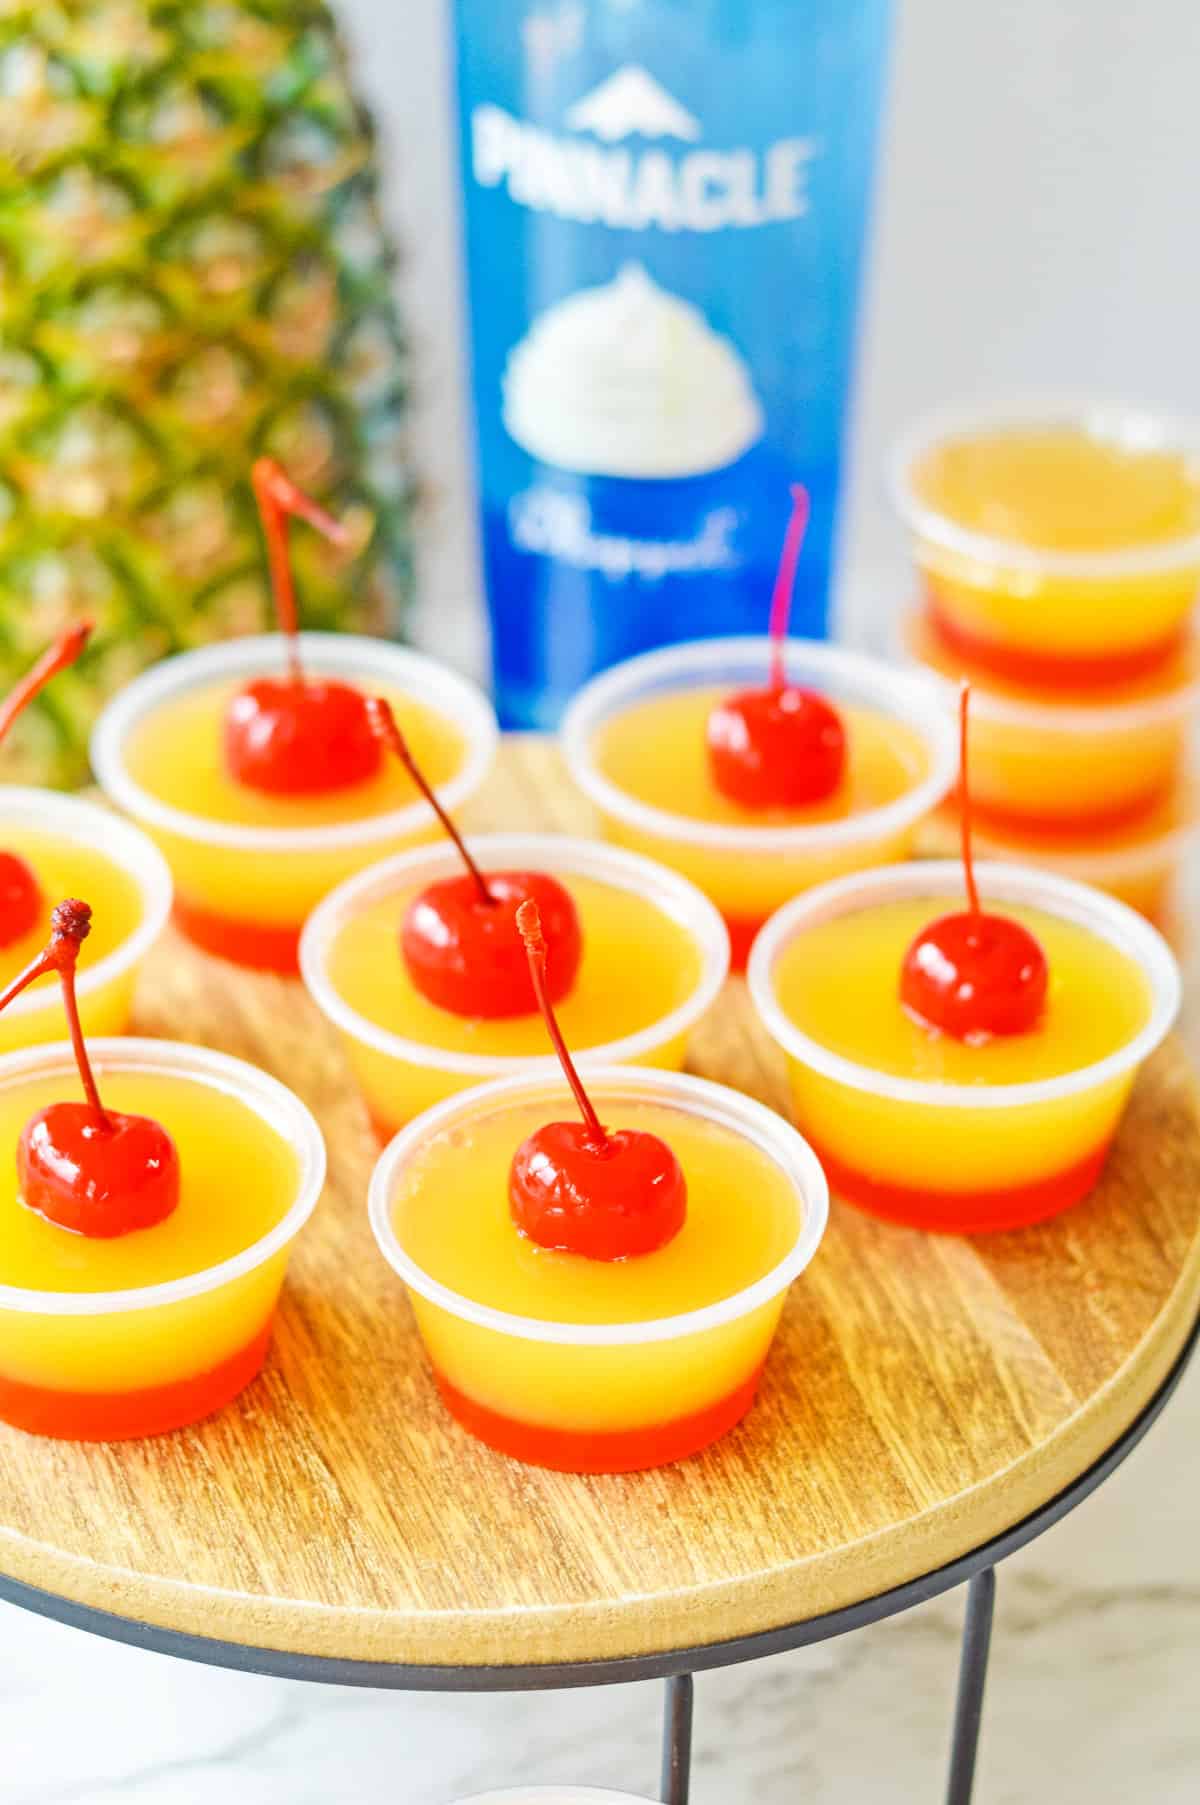 Pineapple upsid down cake jello shots with two distinct layers: a red cherry bottom layer and yellow pineapple top layer, and a cherry on top.